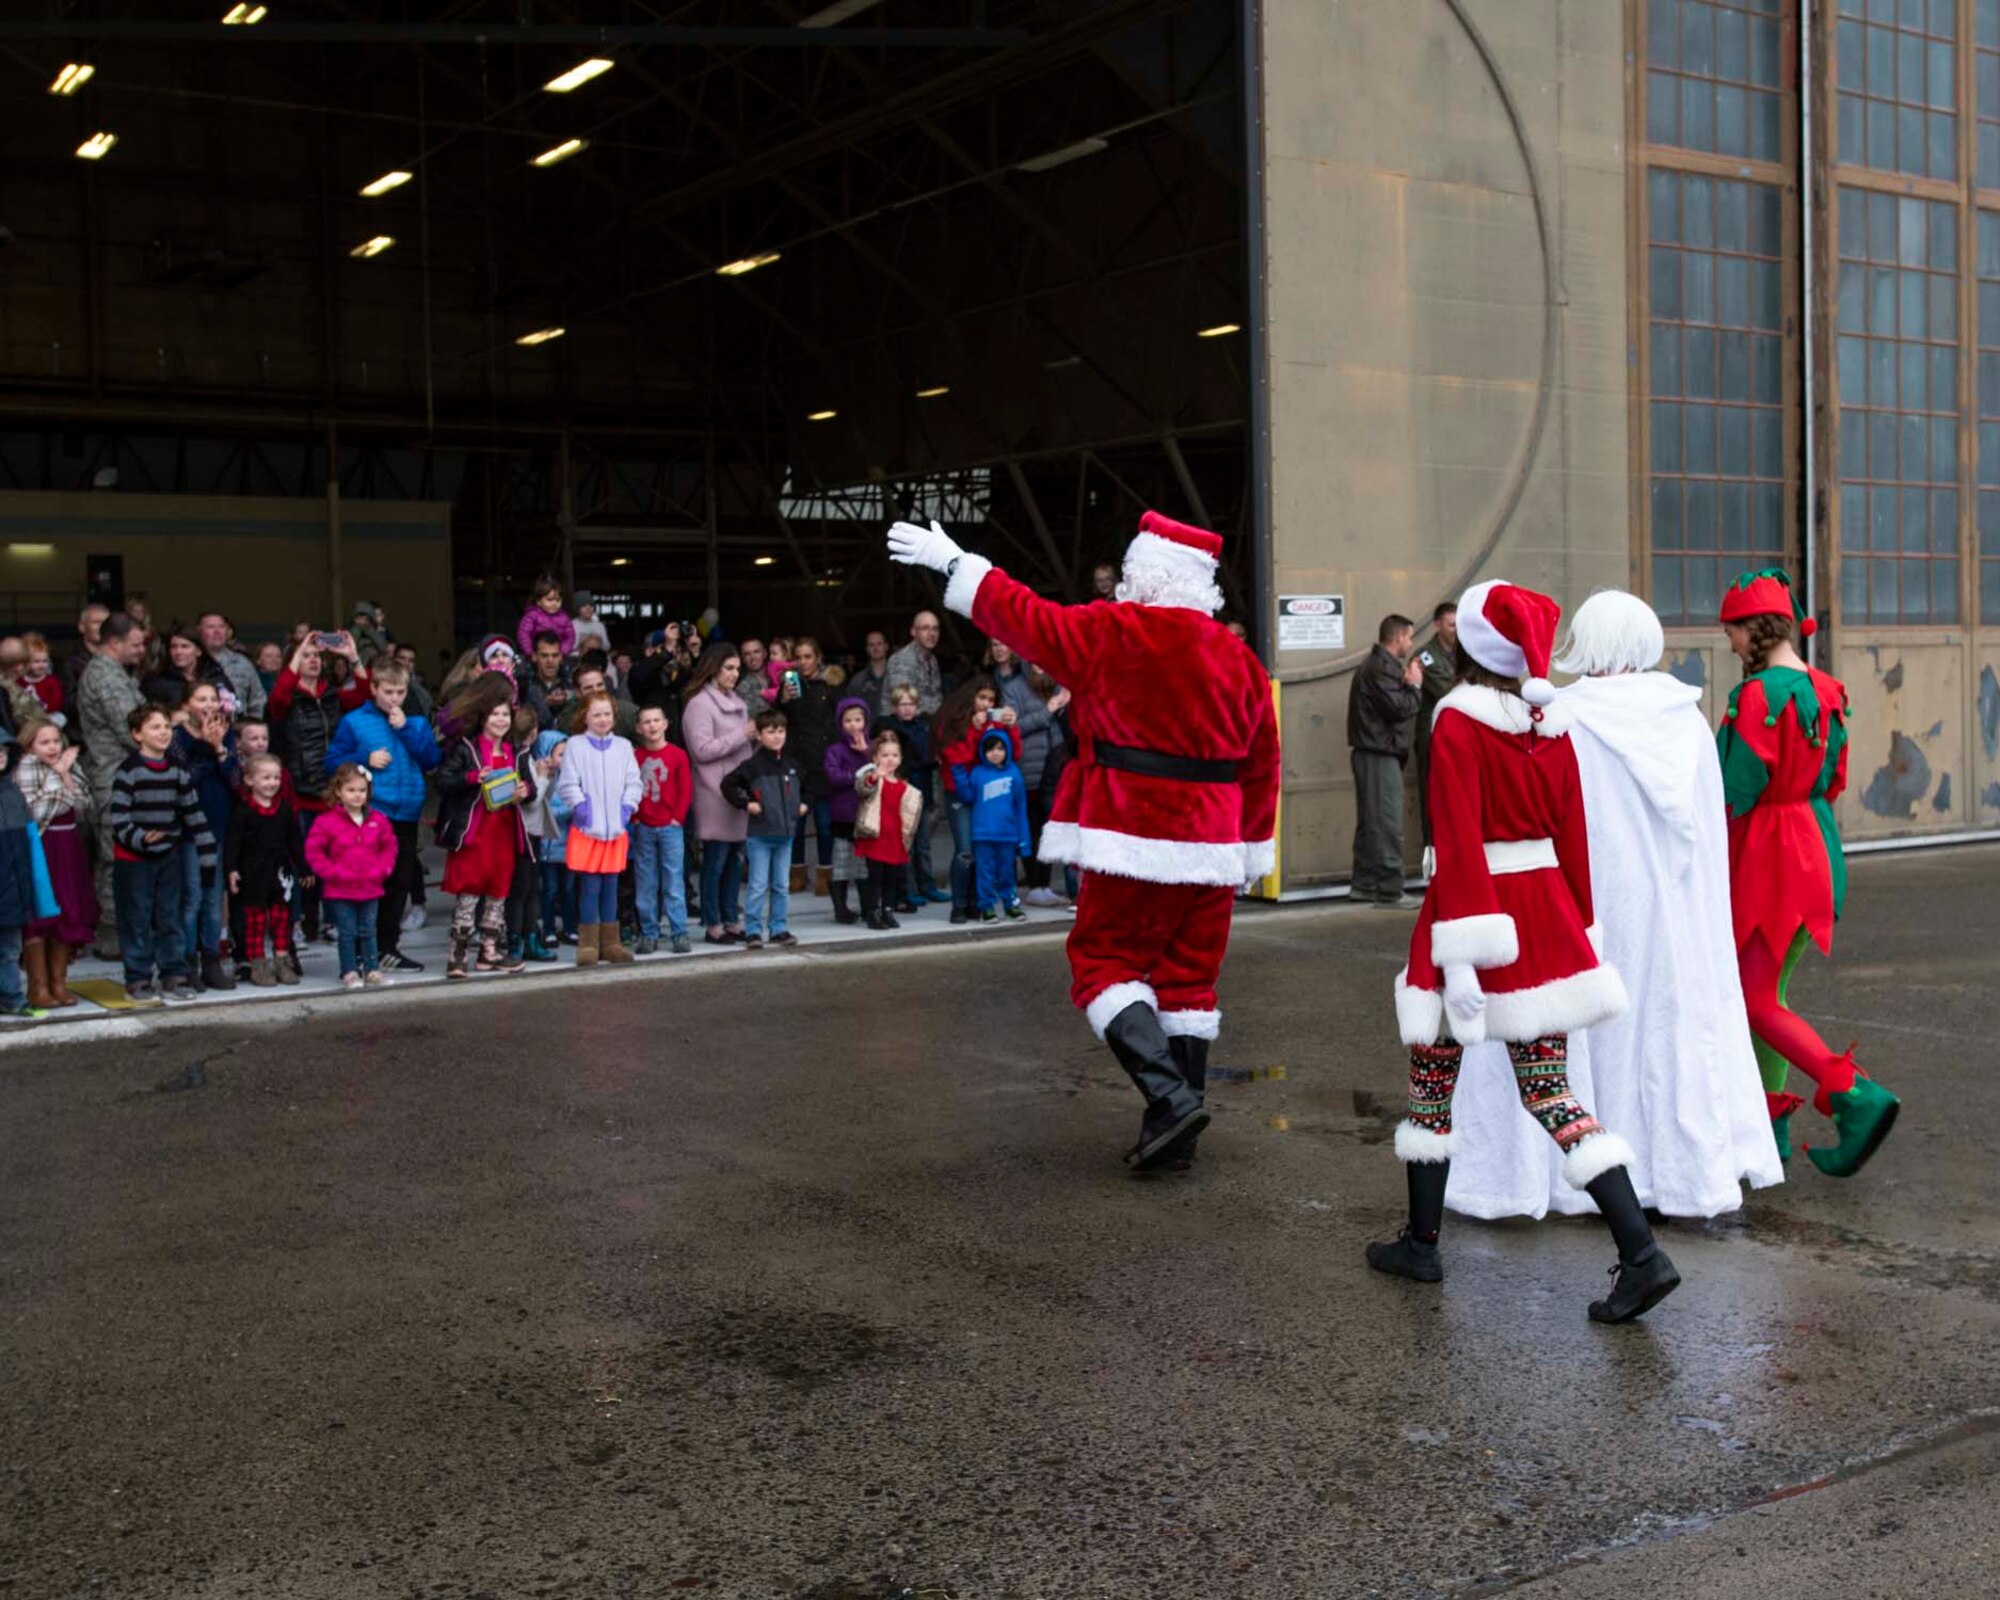 Santa Claus, along with Mrs. Claus and two elves, greet families awaiting them during the 141st Air Refueling Wing’s annual Winter Fest Dec. 1, 2018 at Fairchild Air Force Base, Wash. More than 900 Airmen assigned to the 141st are welcome to take part in the festivities along with their families to celebrate the holiday season. (U.S. Air National Guard photo by Staff Sgt. Rose M. Lust/Released)